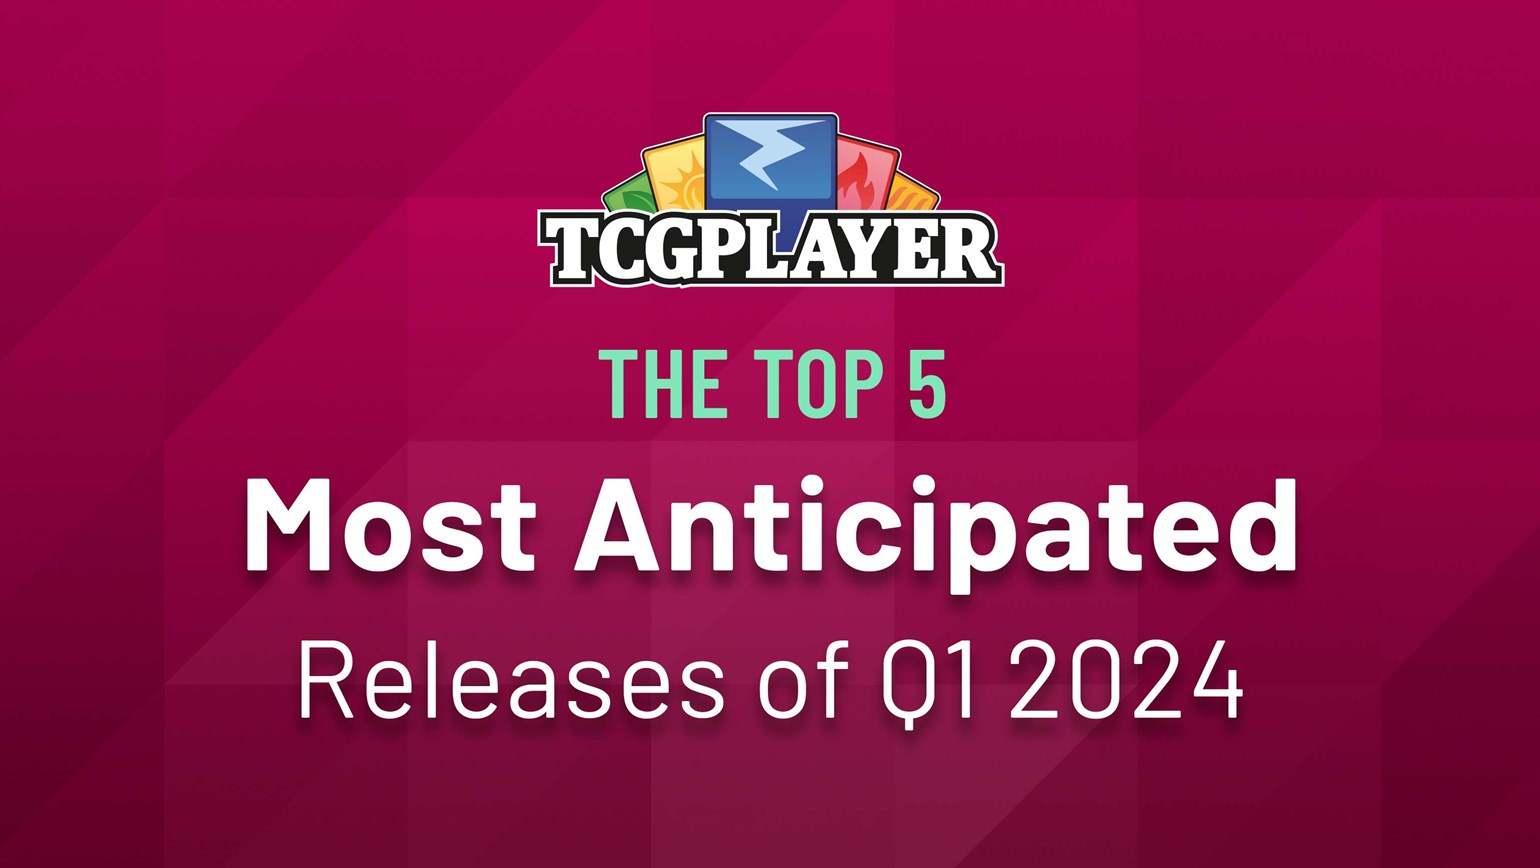 The Top 5 Most Anticipated Releases of Q1 2024